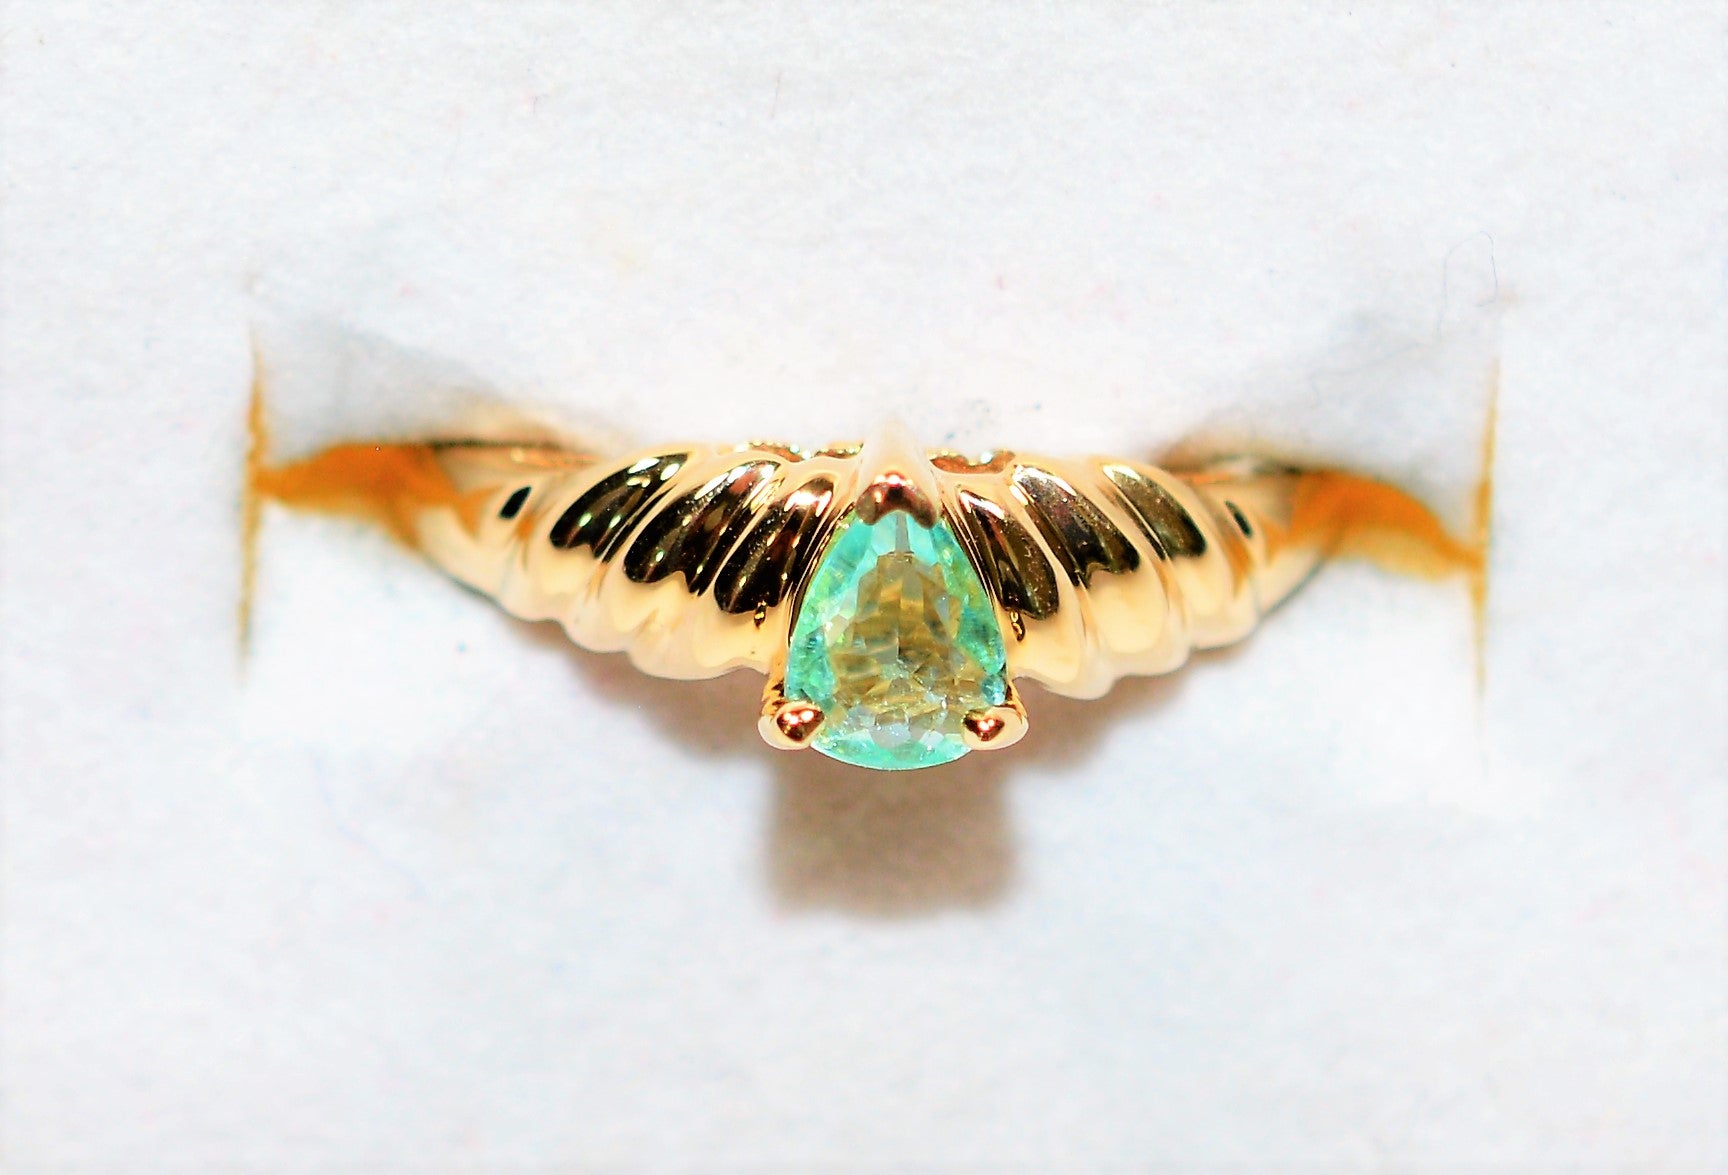 Natural Paraiba Tourmaline Ring 14K Solid Gold .35ct Solitaire Fine Women's Ring Estate Jewelry Fine Jewellery Gemstone Ring Birthstone Ring